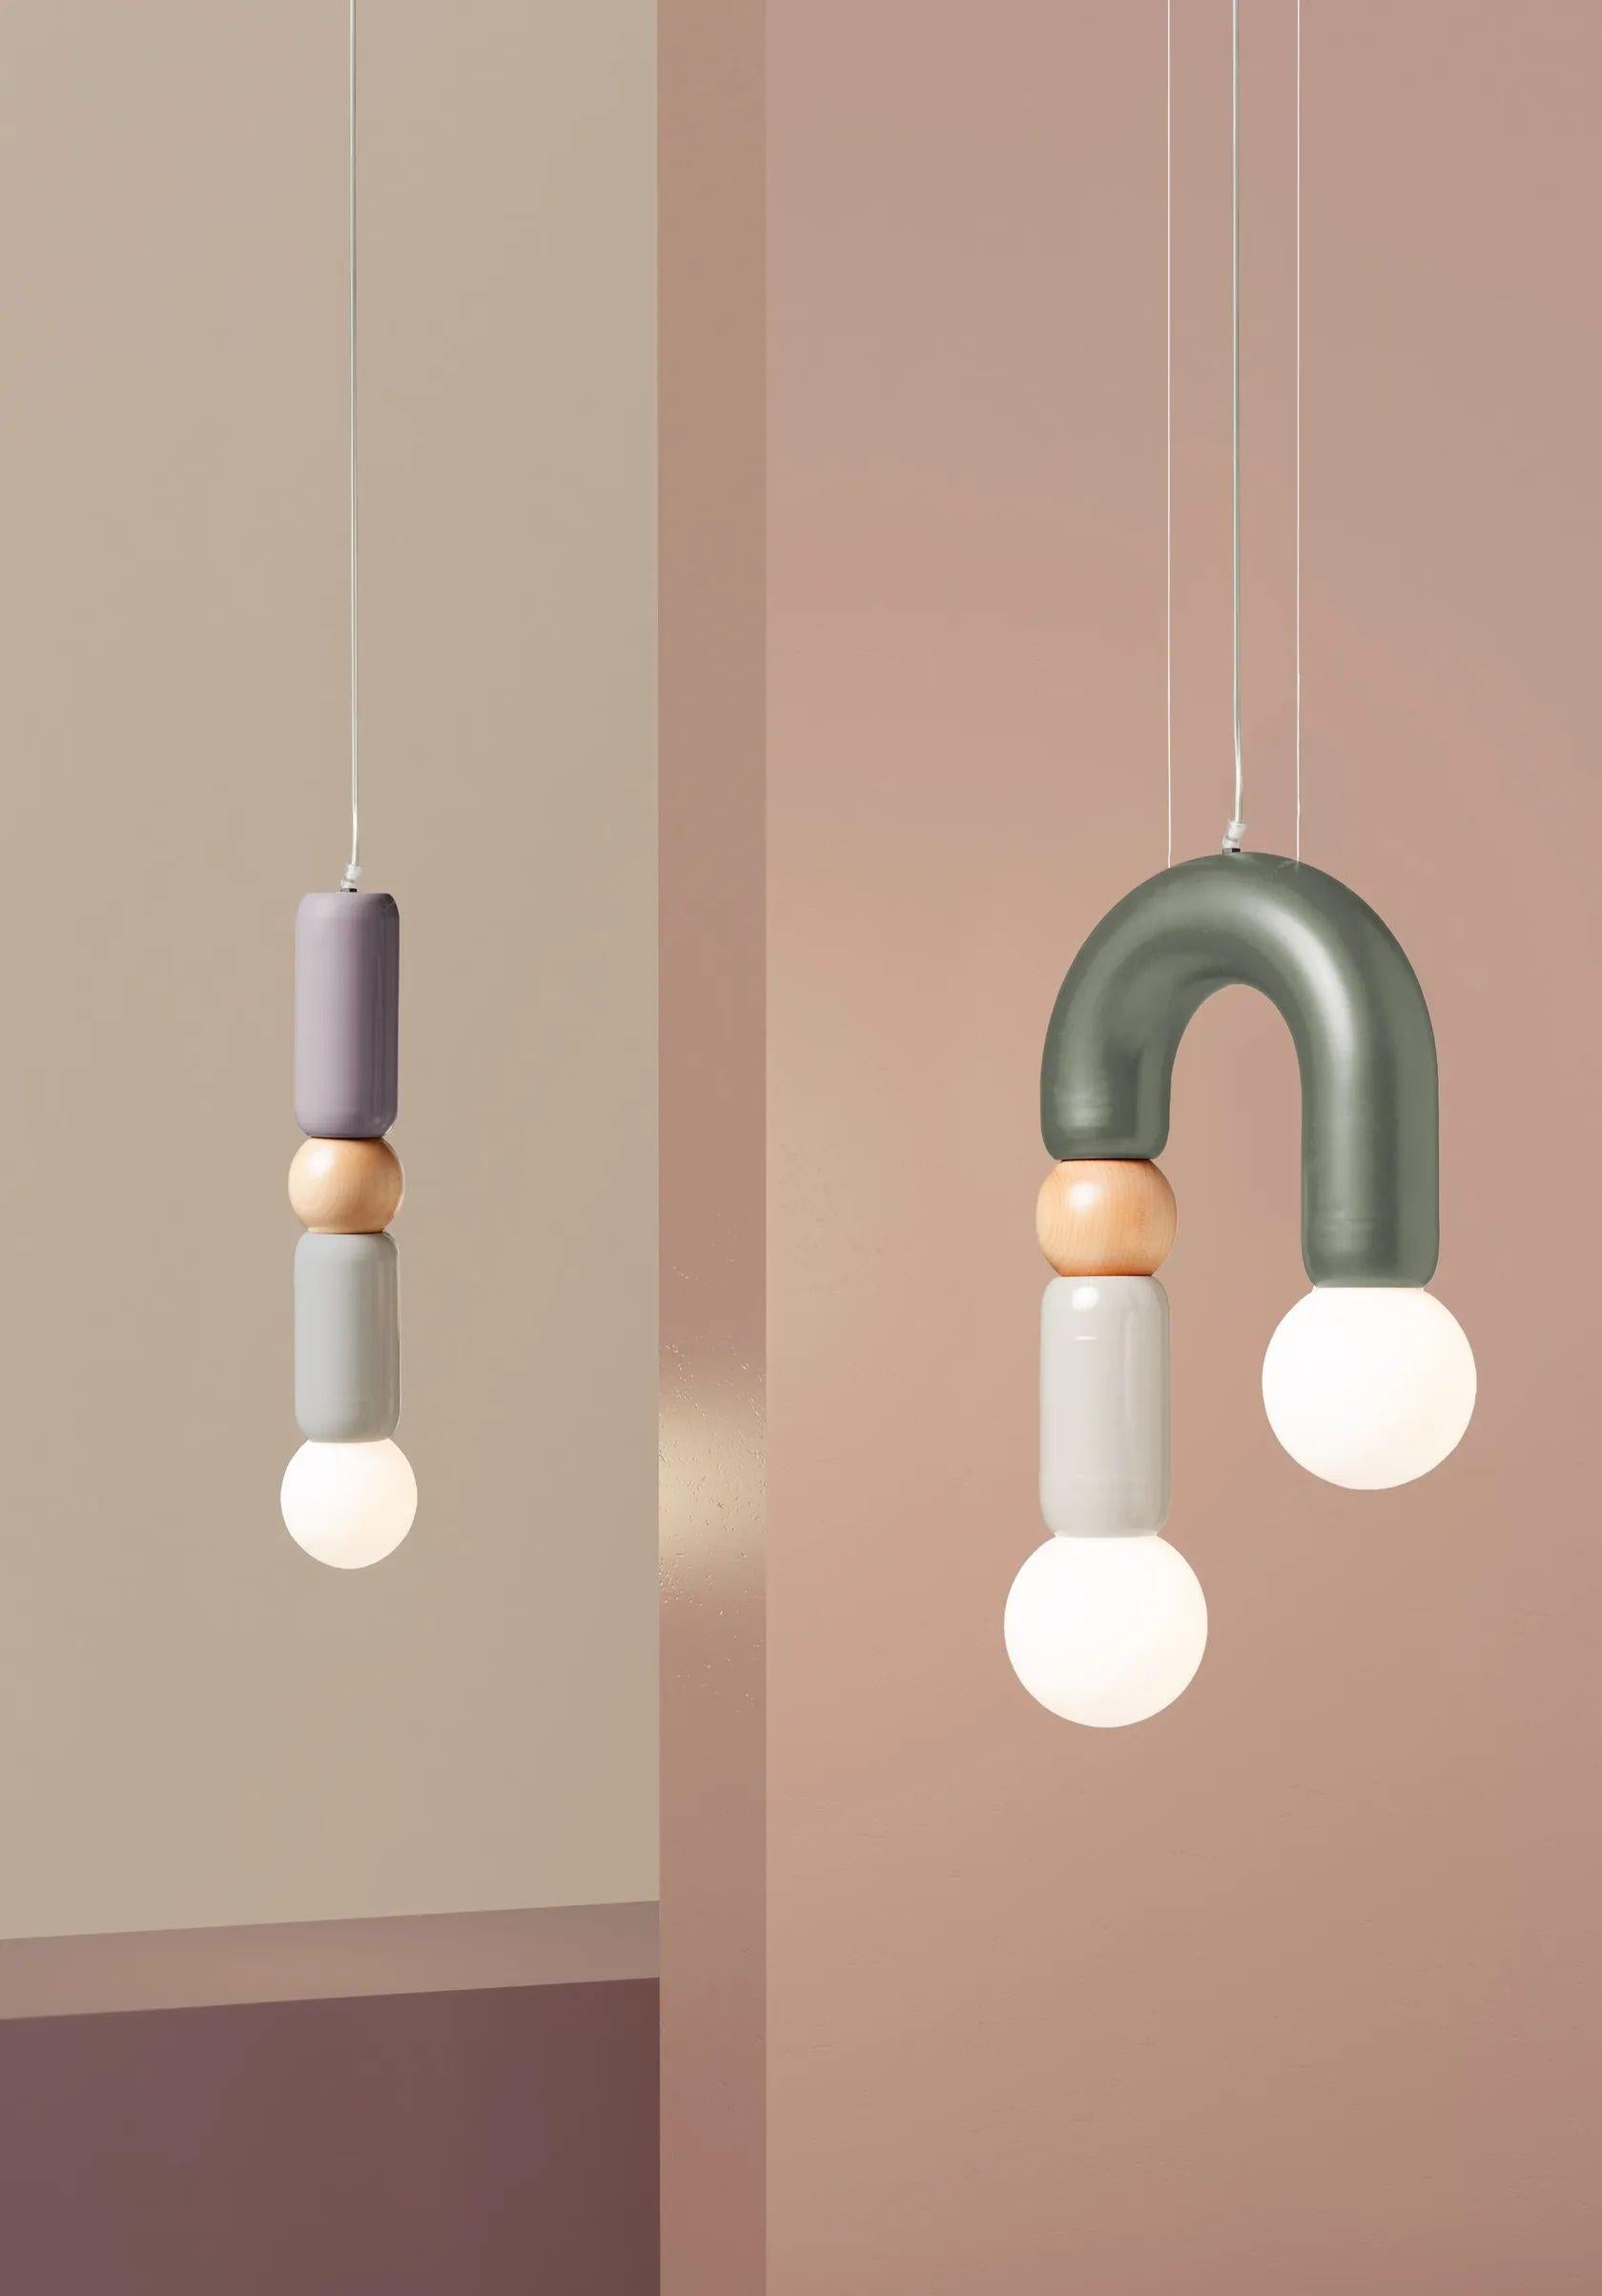 Play II Pendant Lamp by Utu Lamps
Dimensions: W 37 x D 14 x H 61 cm
Materials: Lacquered metal, Natural oak.
Variations Available. Please contact us.

All our lamps can be wired according to each country. If sold to the USA it will be wired for the